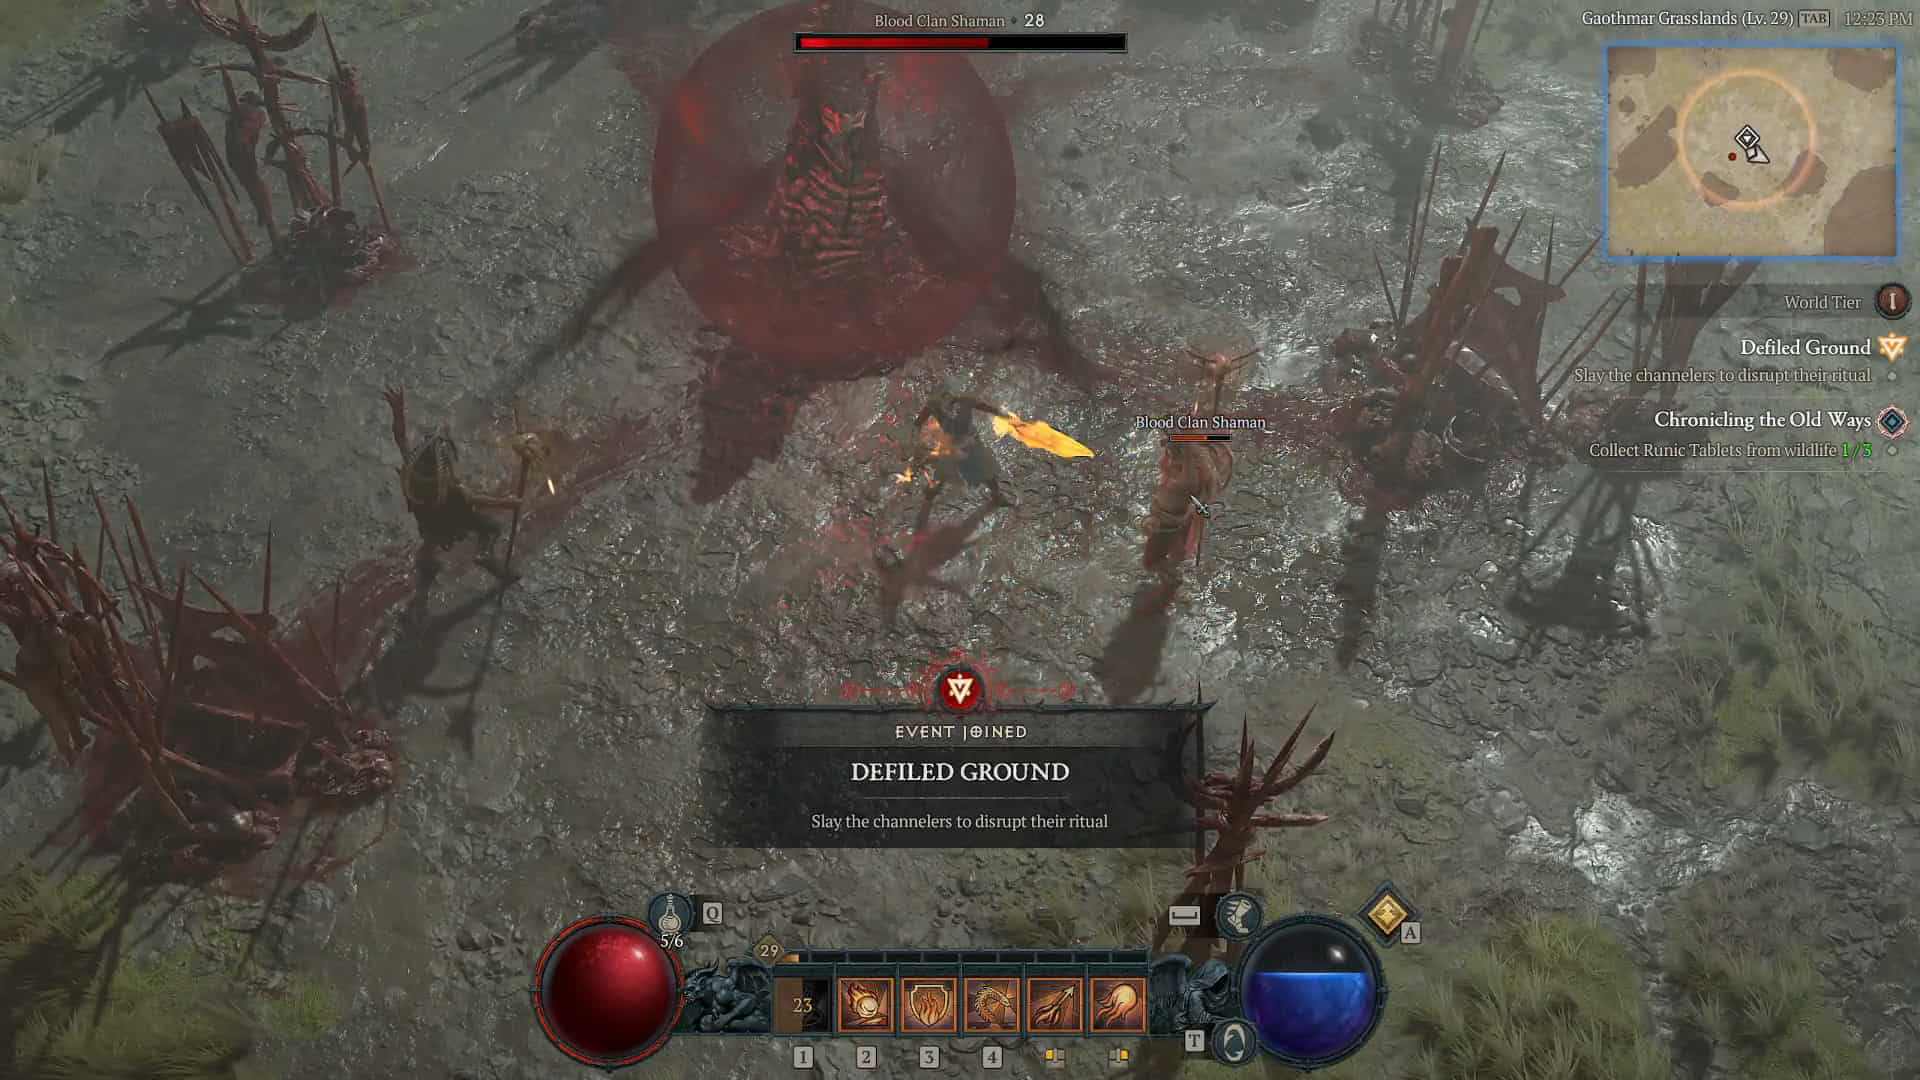 All Diablo 4 events in Season 1: An image of a player completing the Defiled Ground event in the game.